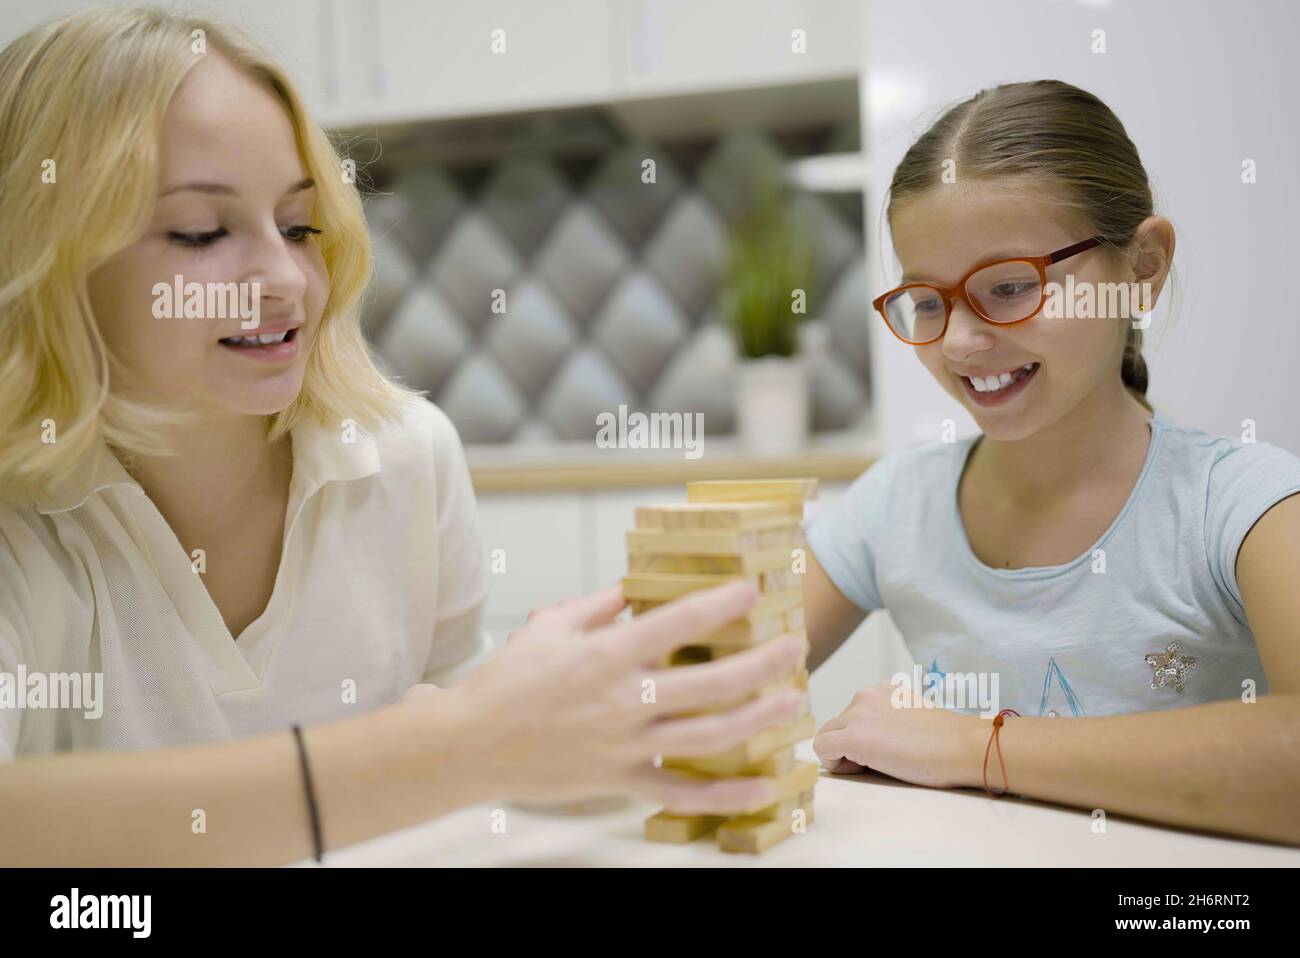 two girls have fun playing Jenga together - board game to remove wooden blocks and kids leisure concept. Stock Photo